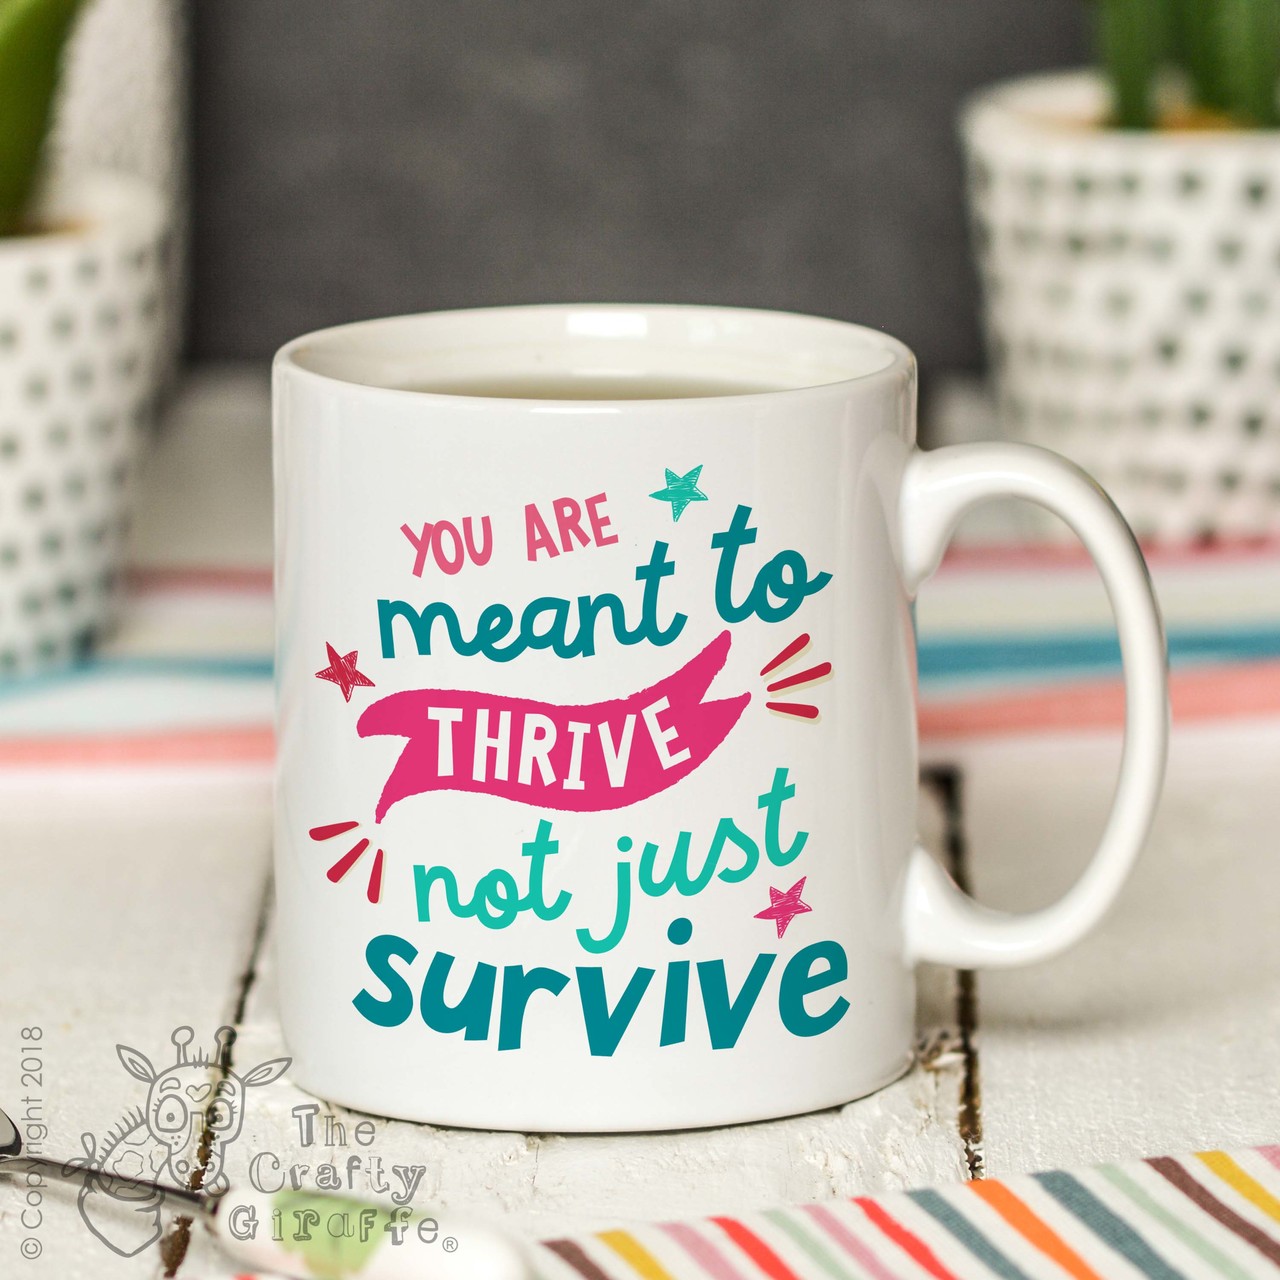 You are meant to thrive not just survive Mug